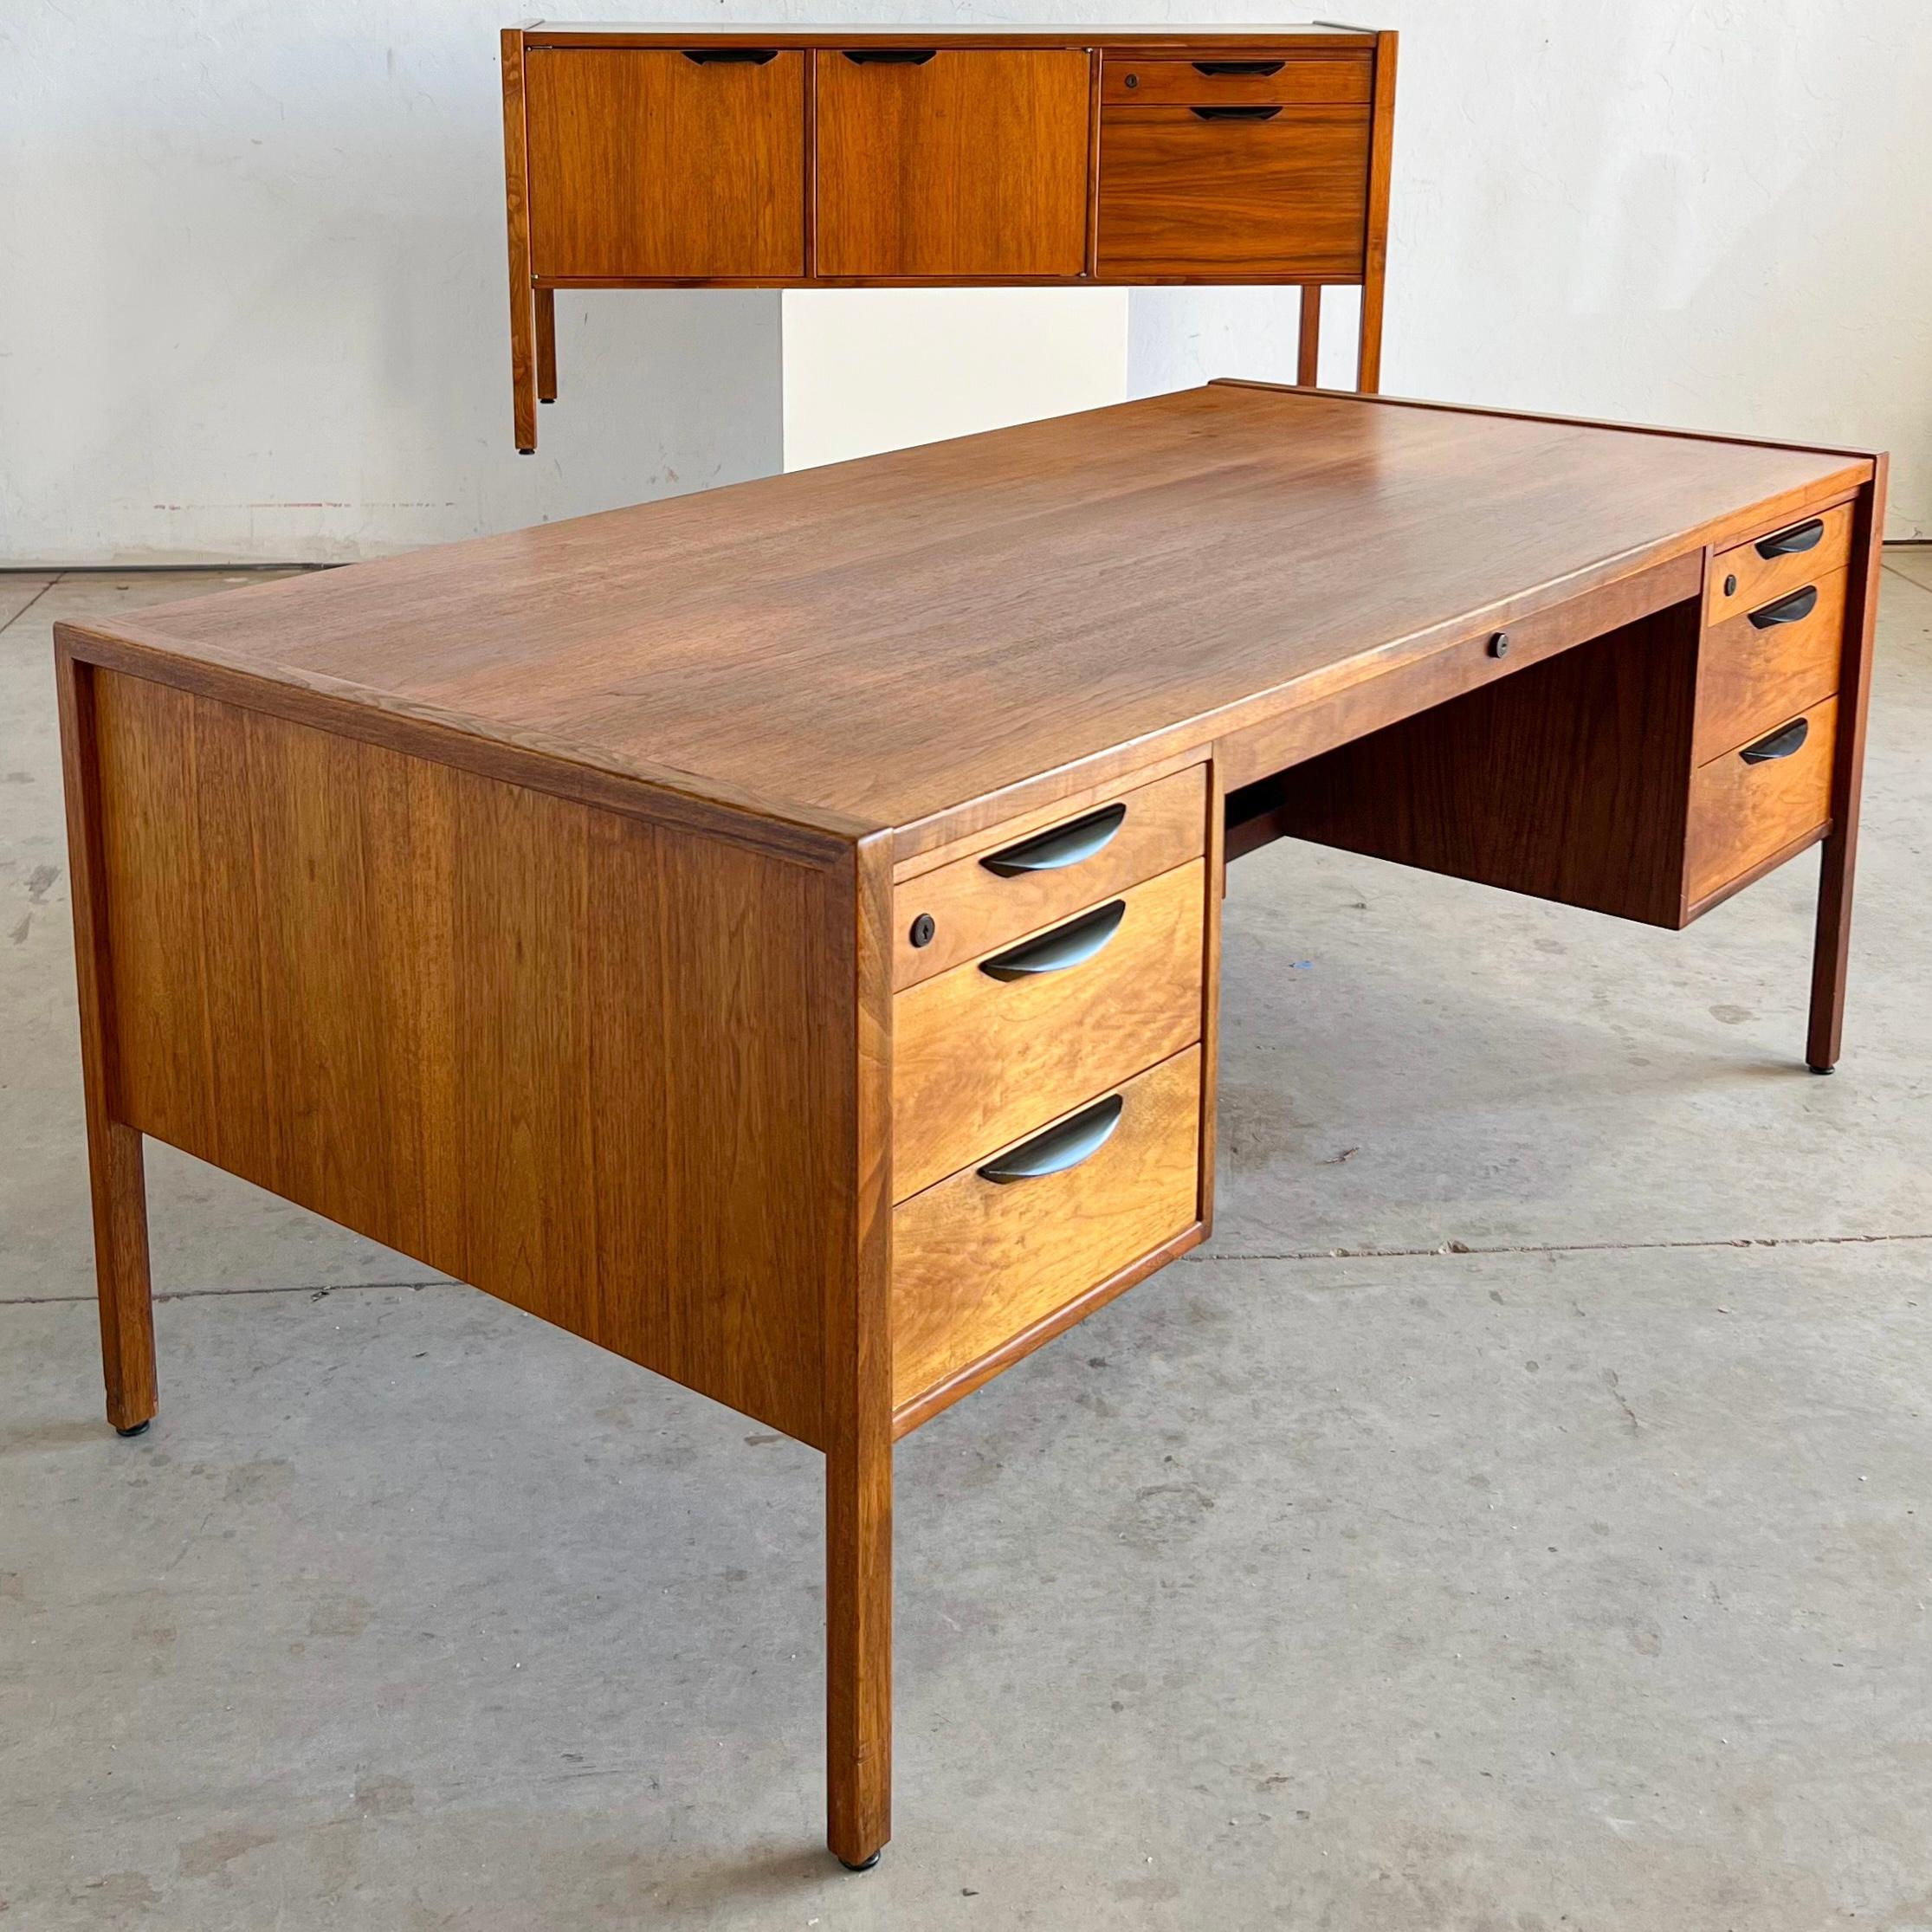 Mid-century walnut executive desk by Jens Risom.

his executive desk set was bought new by a local law firm and never left it’s spot until we found it! both pieces feature the same black iron demilune pulls, with all drawers on ball-bearing and